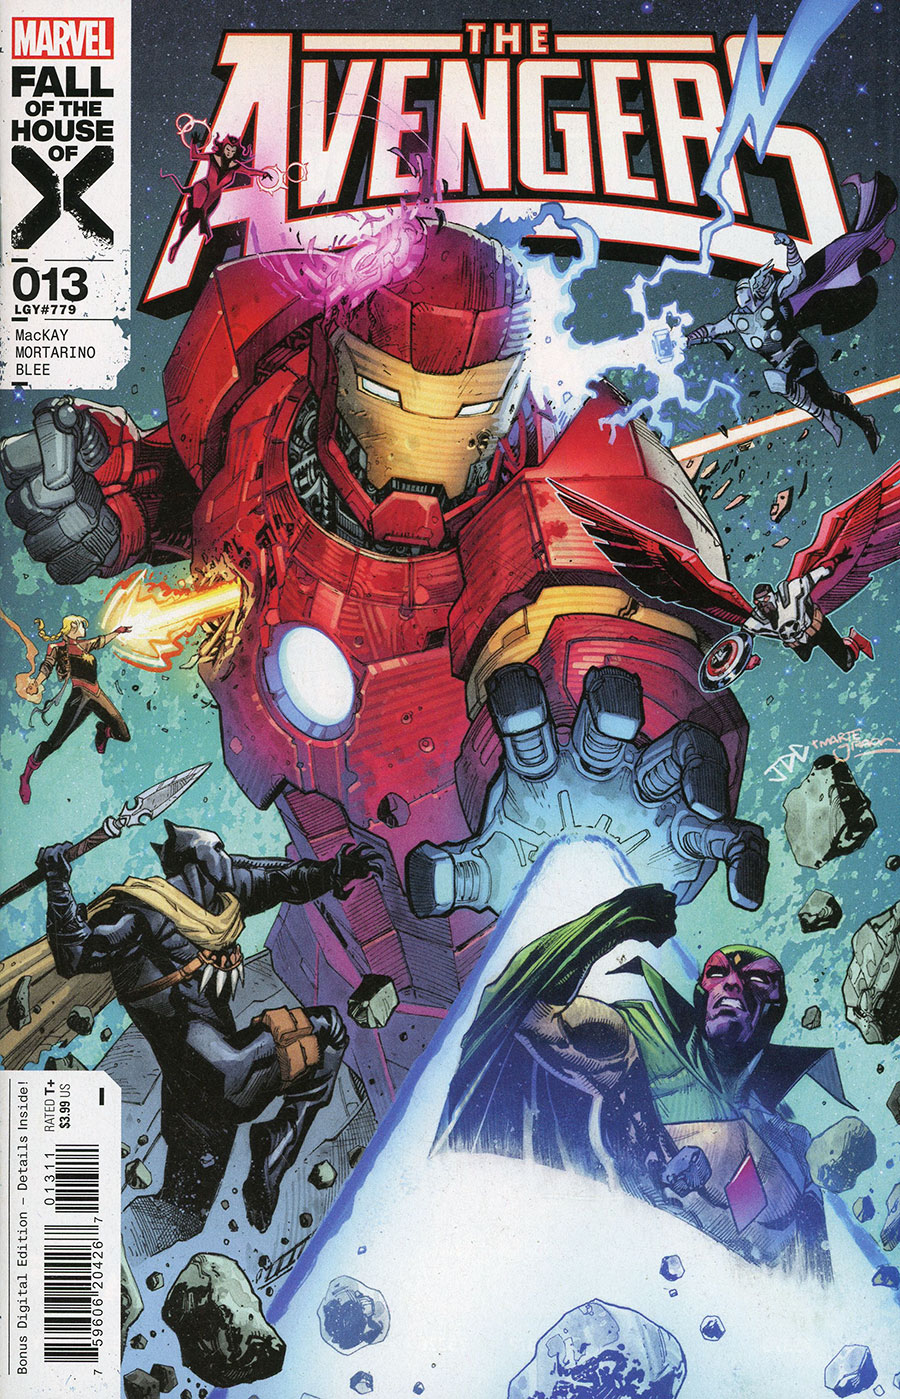 Avengers Vol 8 #13 Cover A Regular Joshua Cassara Cover (Fall Of The House Of X Tie-In)